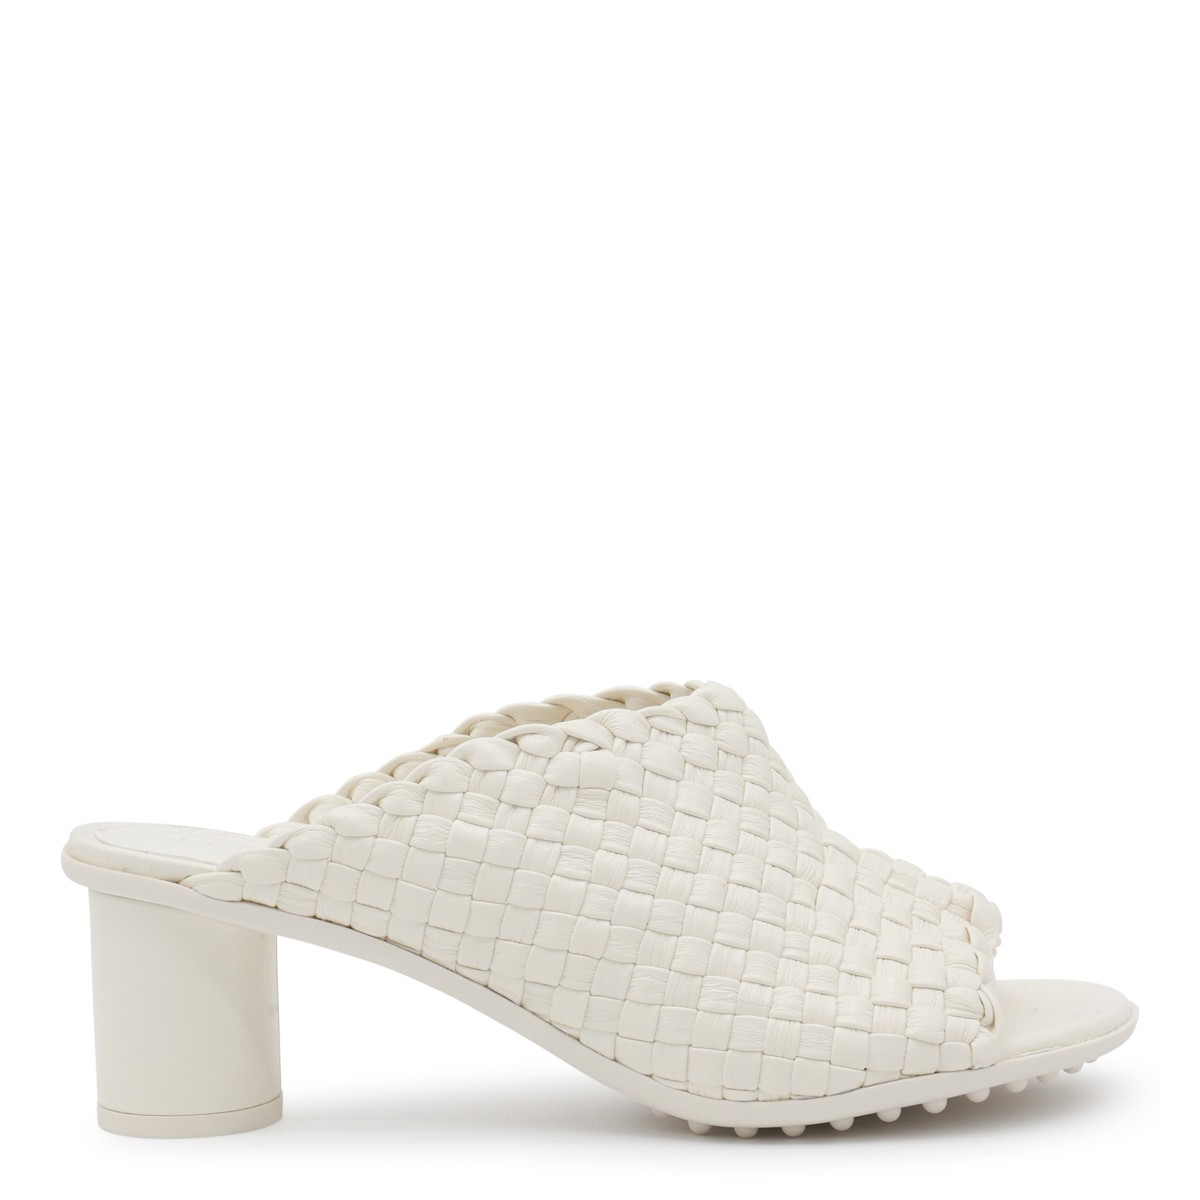 WHITE LEATHER ATOMIC MULE SANDALS